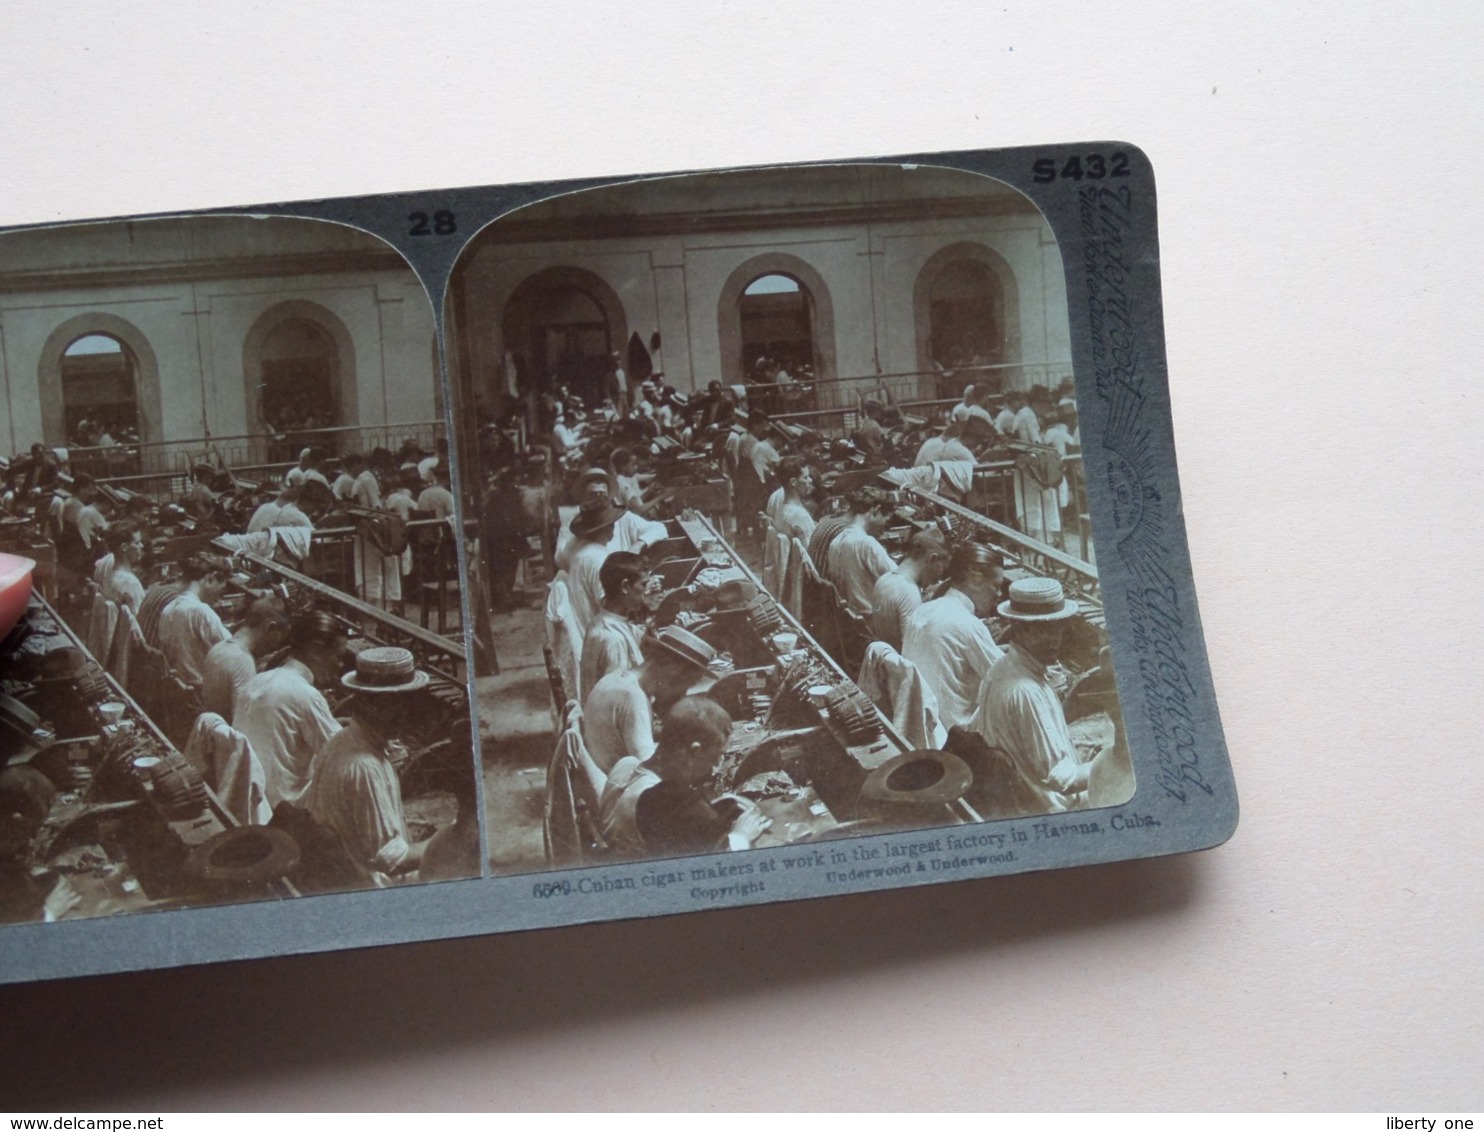 CIGAR Makers At Factory In HAVANA, CUBA (6509) ( Stereo Photo : Underwood > See Photo ) ! - Photos Stéréoscopiques